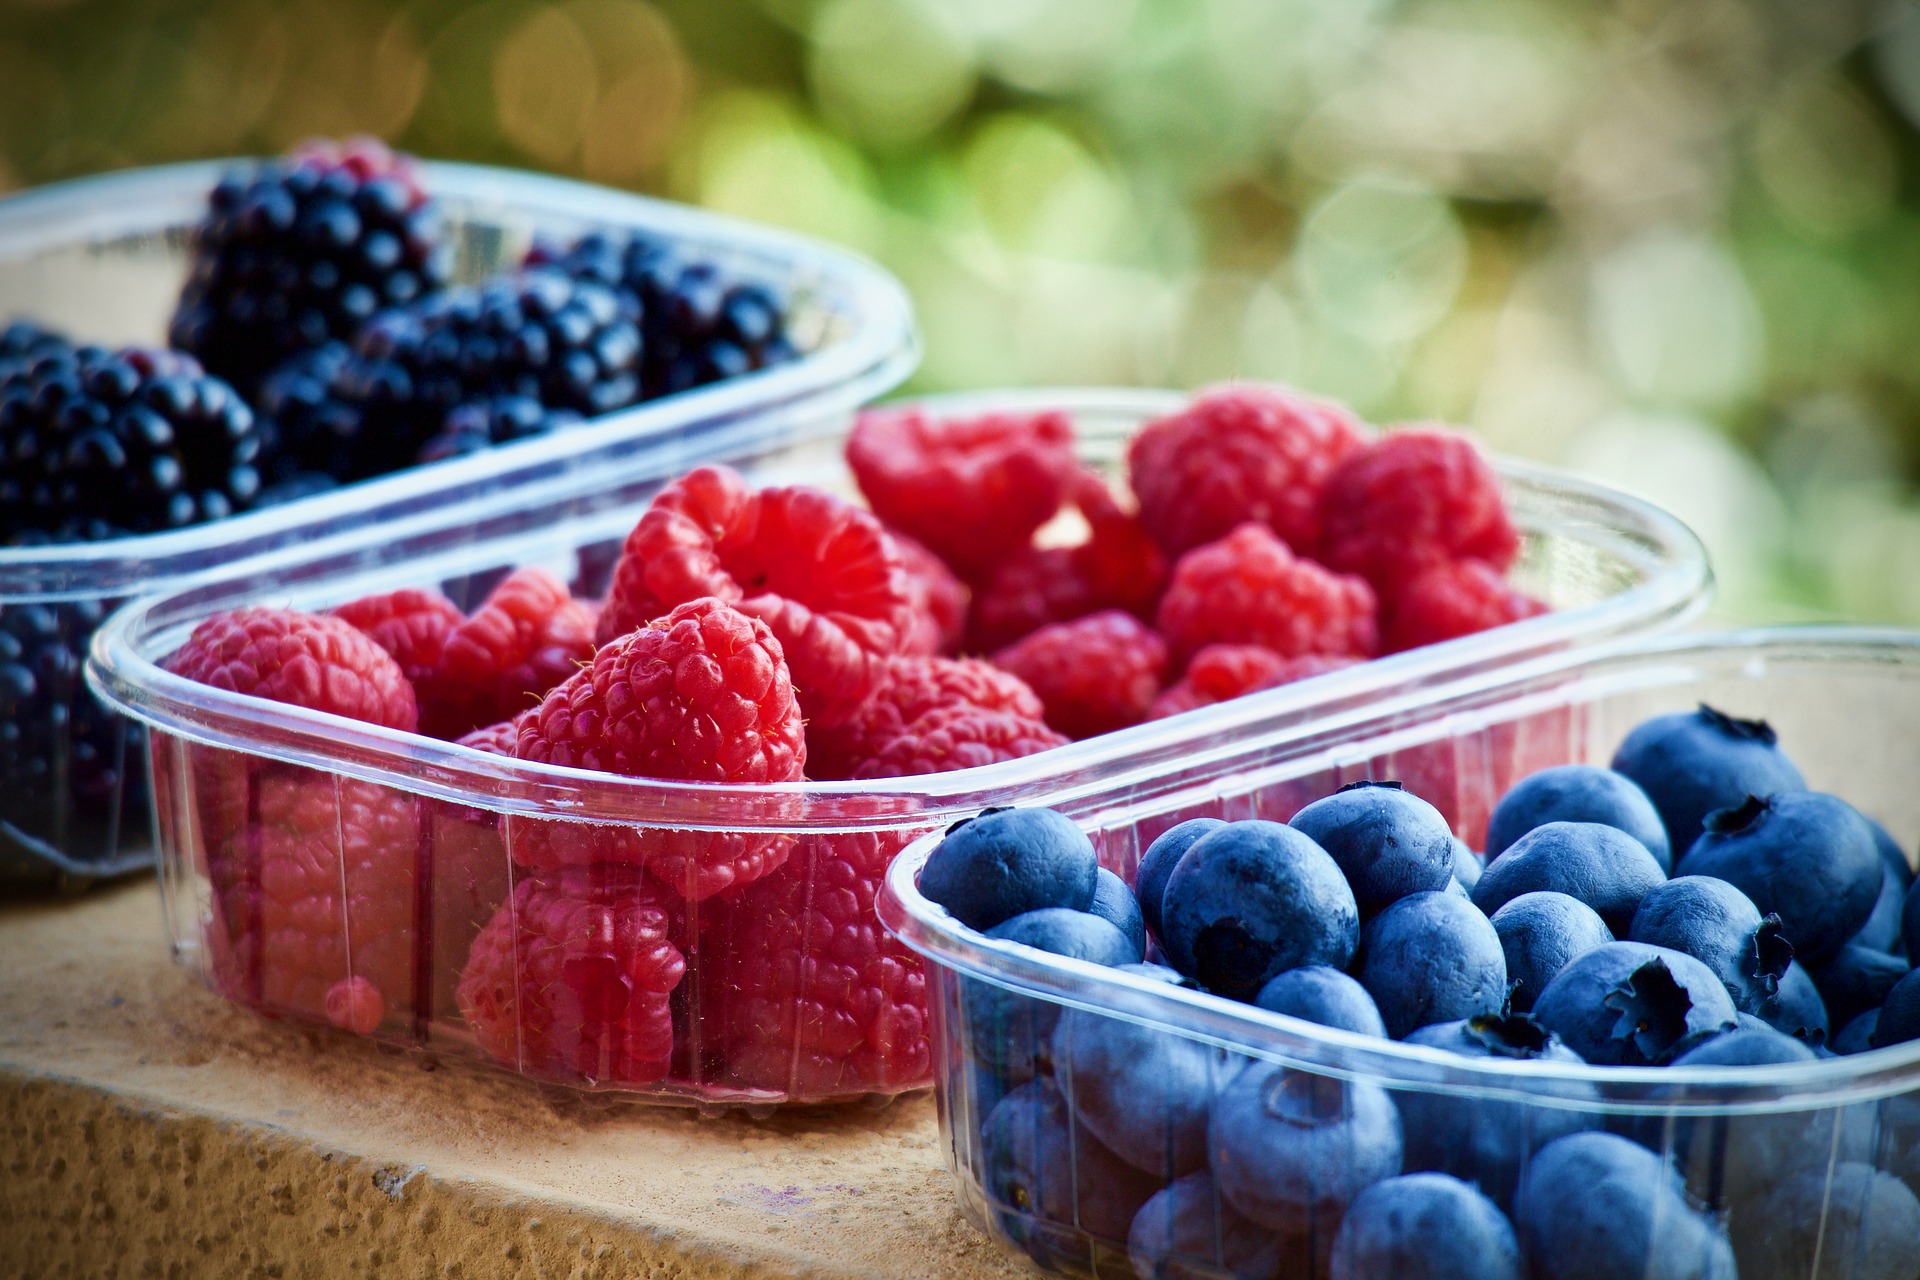 It's 'Love Fresh Berries' National Berry Month.